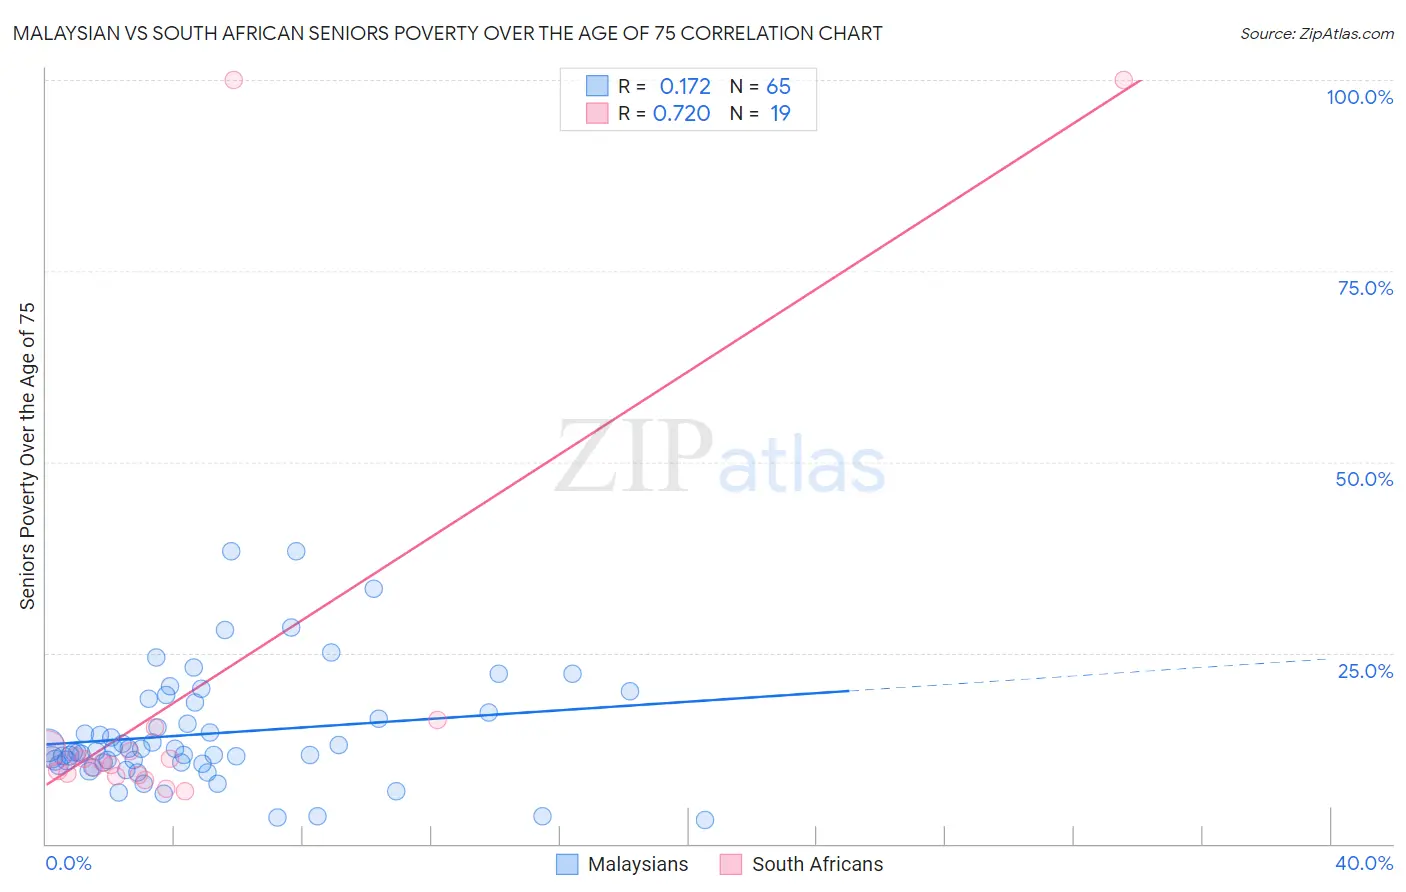 Malaysian vs South African Seniors Poverty Over the Age of 75